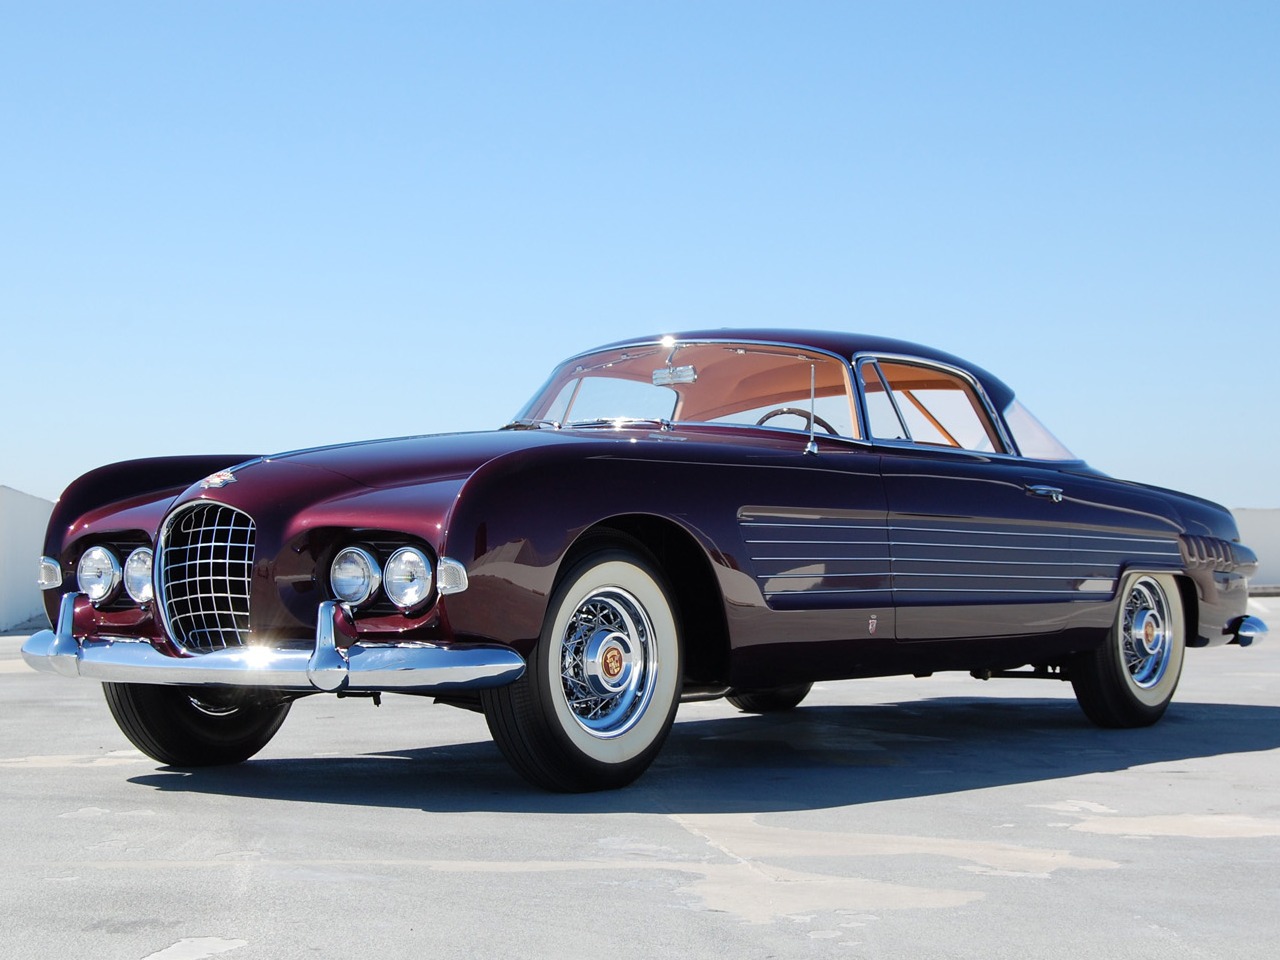 Cadillac Coupe (Ghia), 1953 - Formerly owned by Rita Hayworth